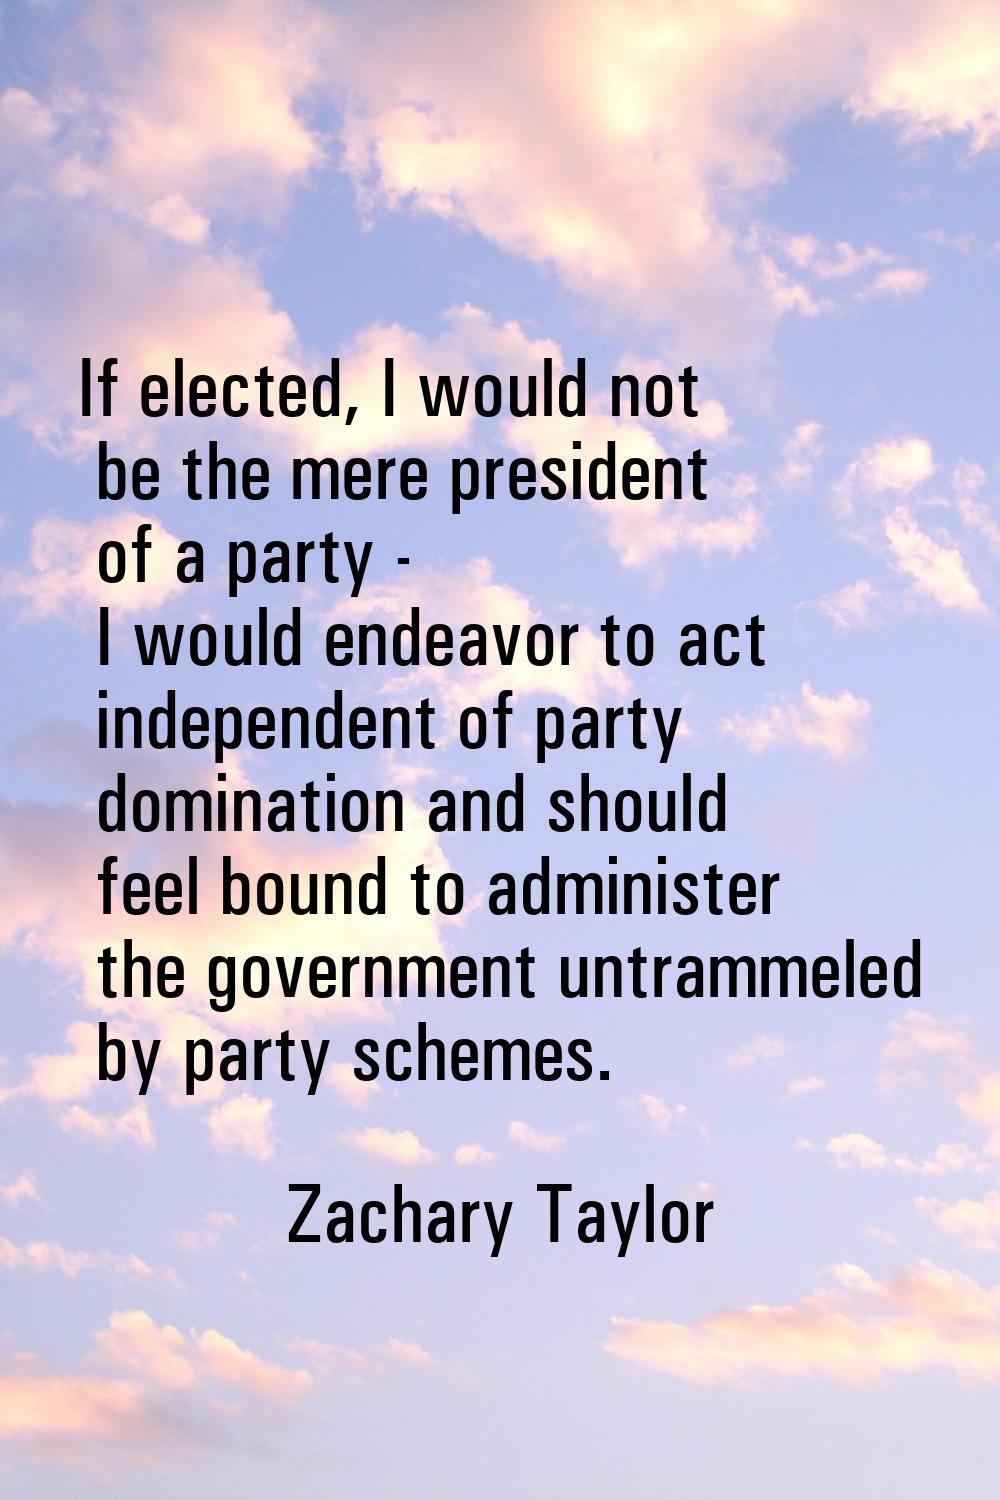 If elected, I would not be the mere president of a party - I would endeavor to act independent of p